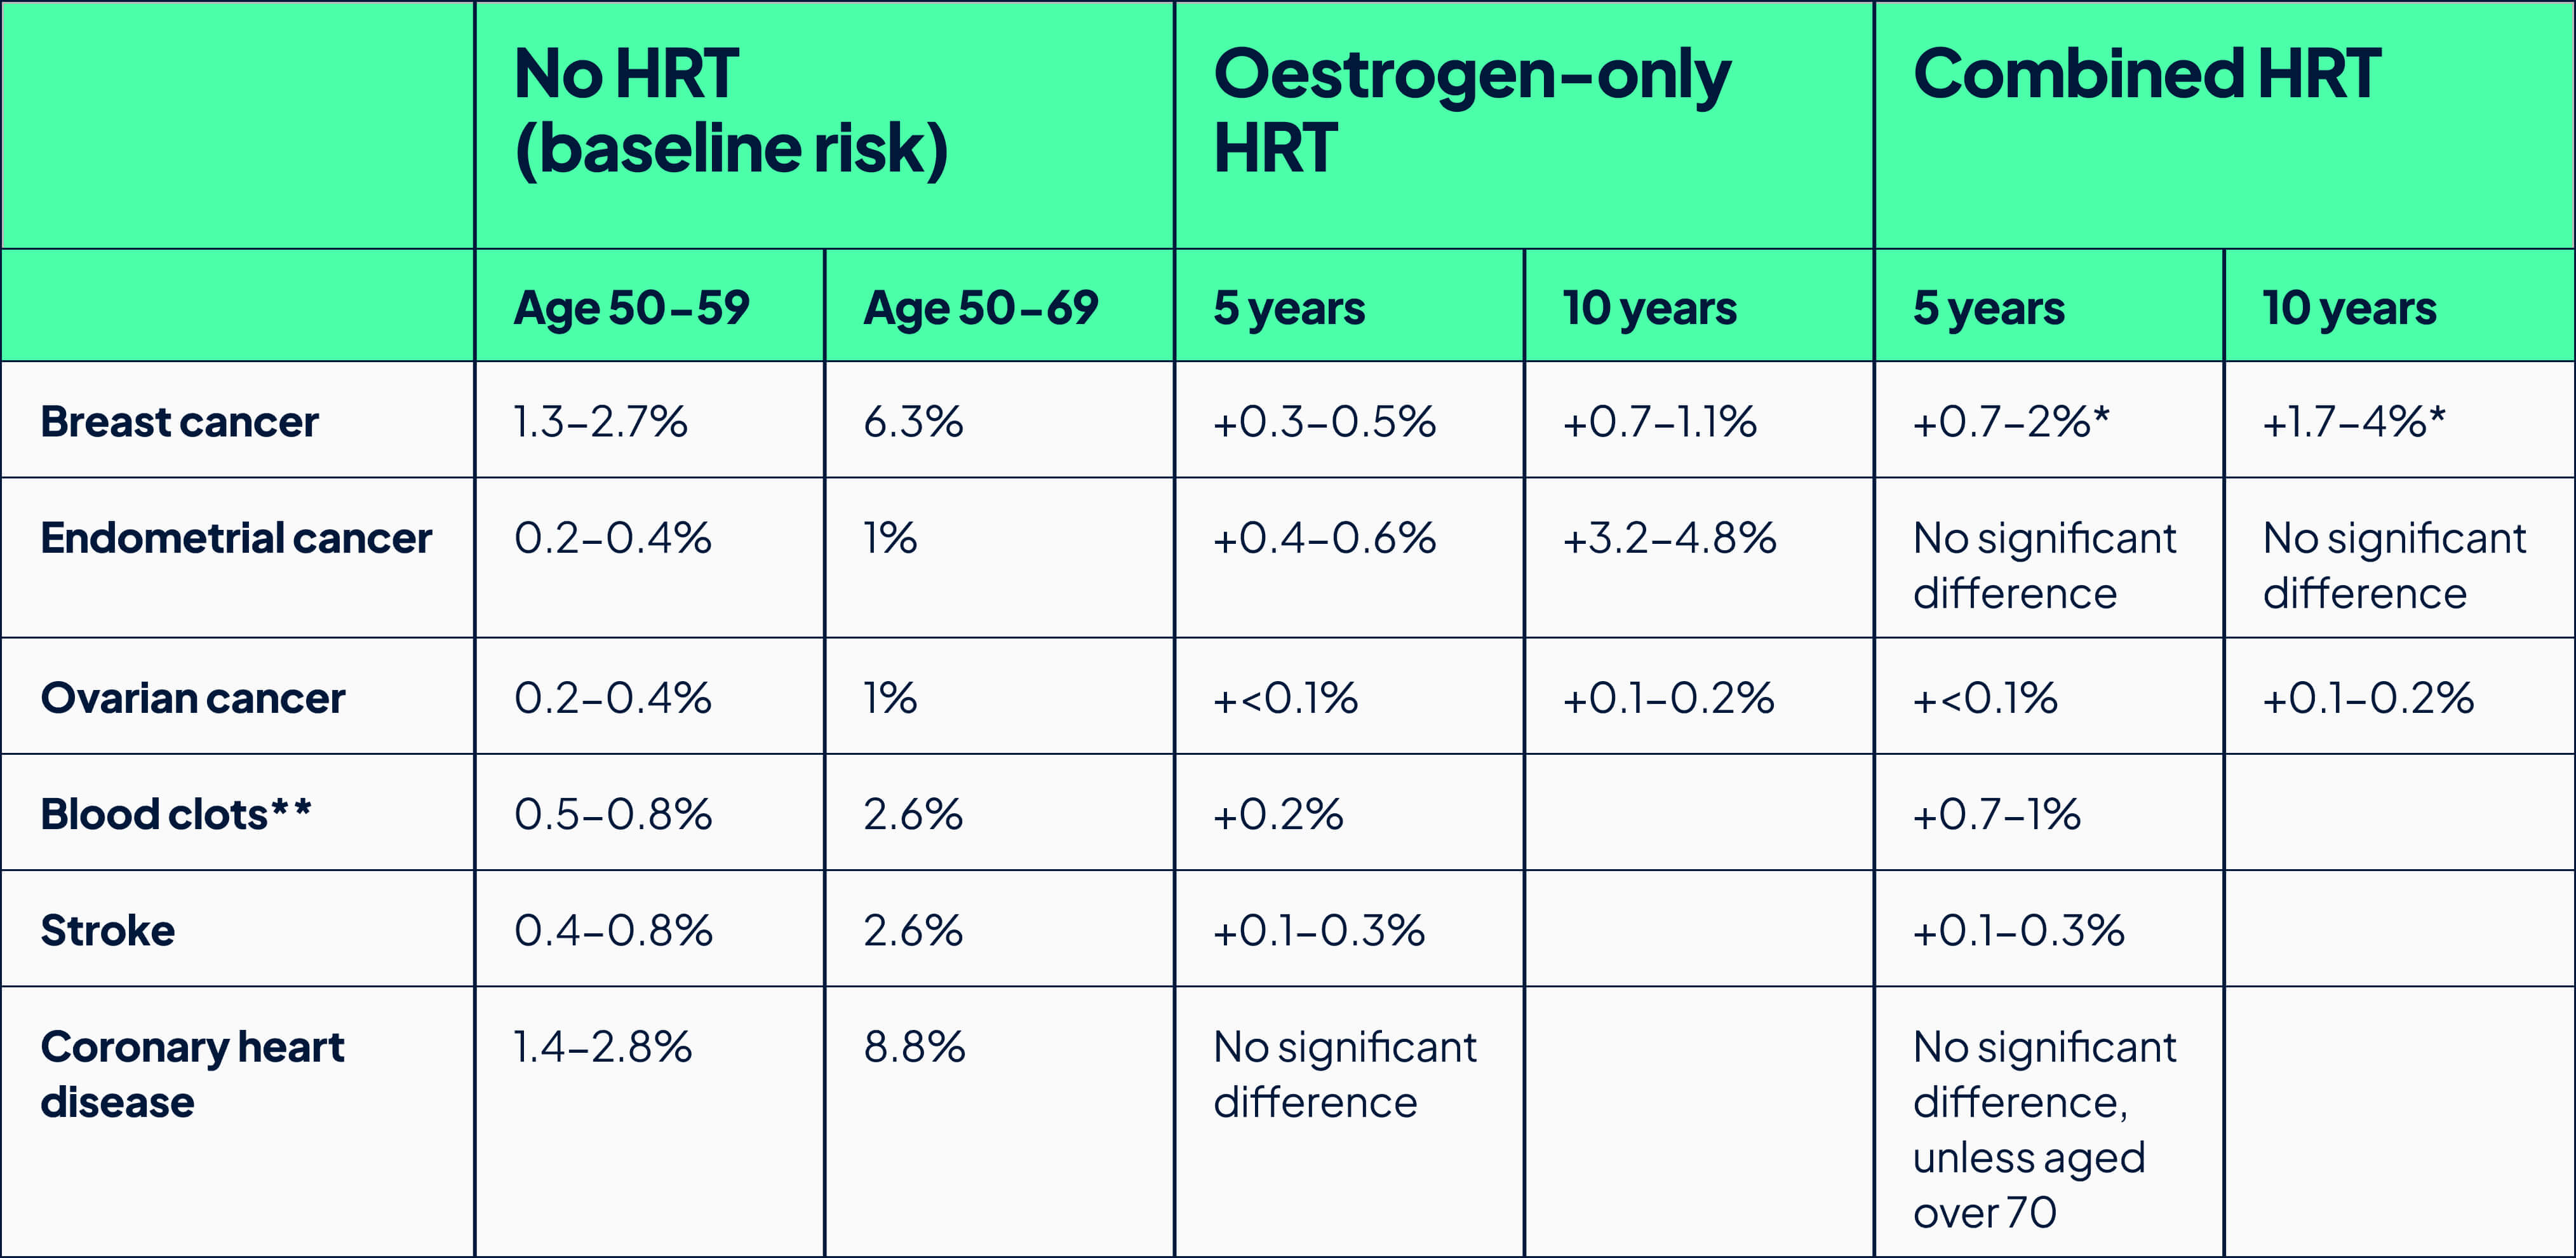 Table to show the risks associated with taking HRT according to age and duration